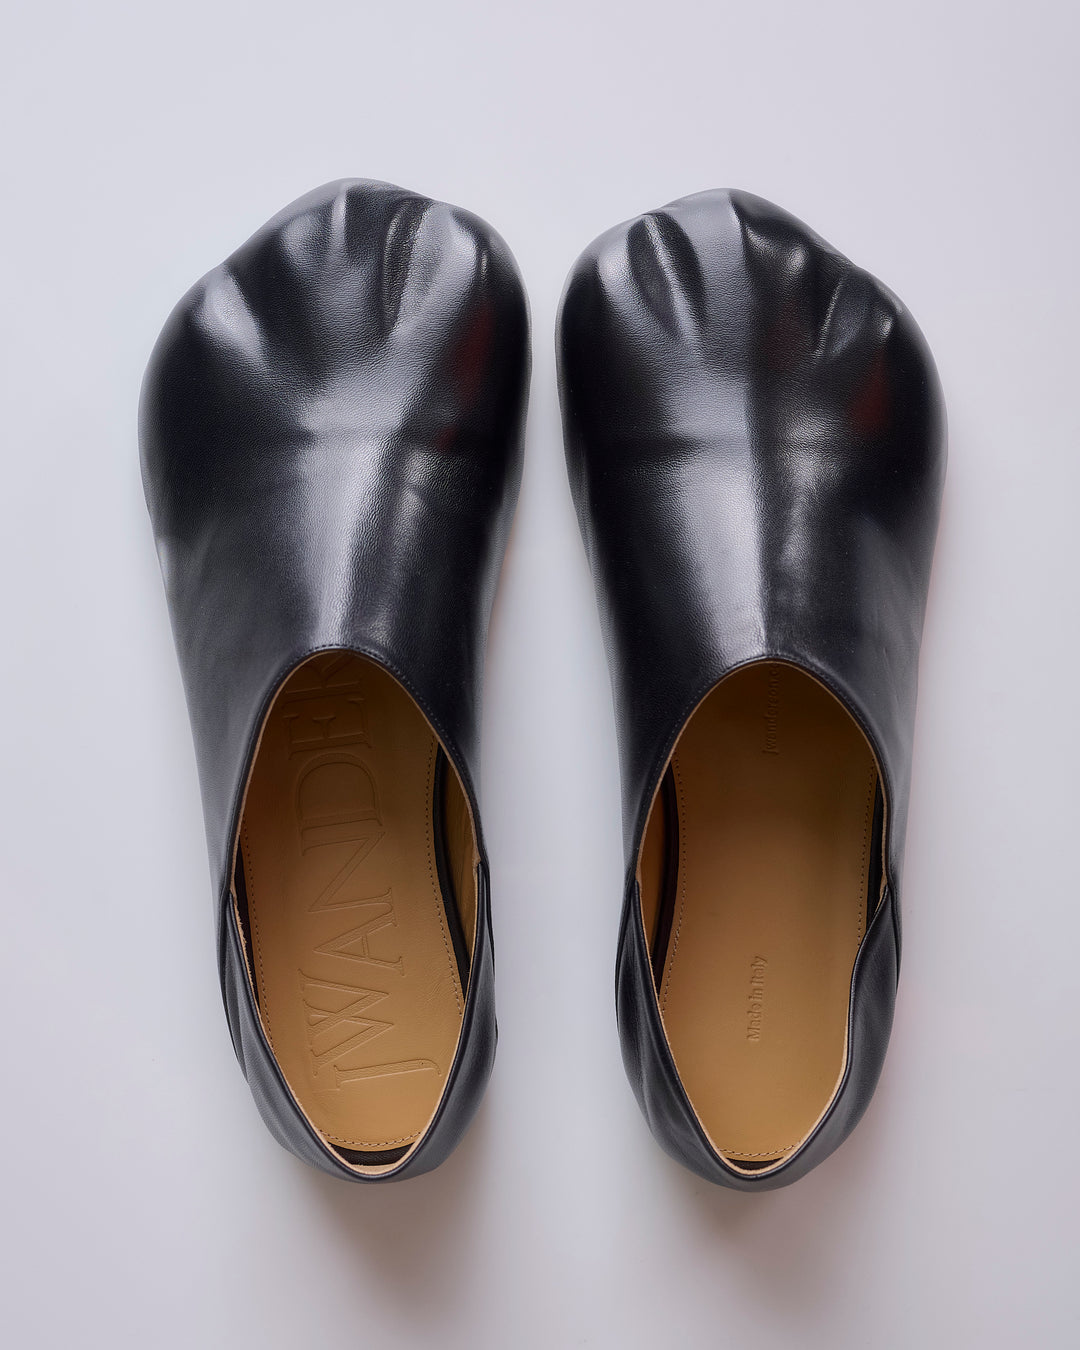 JW Anderson Paw Loafer Nappa Lux Leather Black